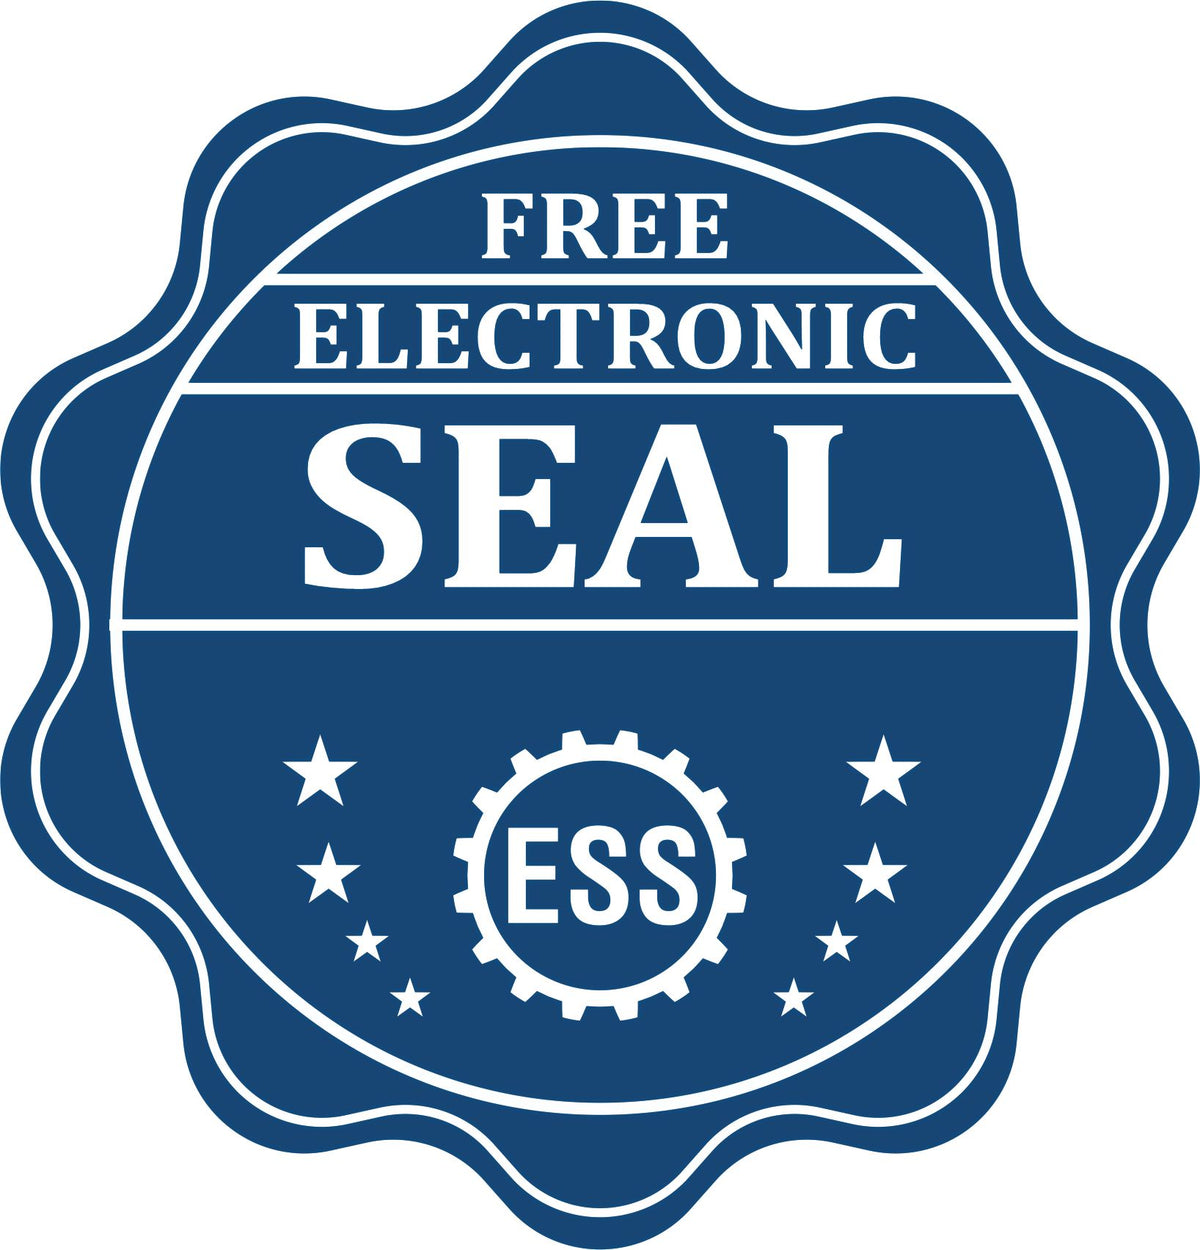 A badge showing a free electronic seal for the Extended Long Reach Indiana Surveyor Embosser with stars and the ESS gear on the emblem.